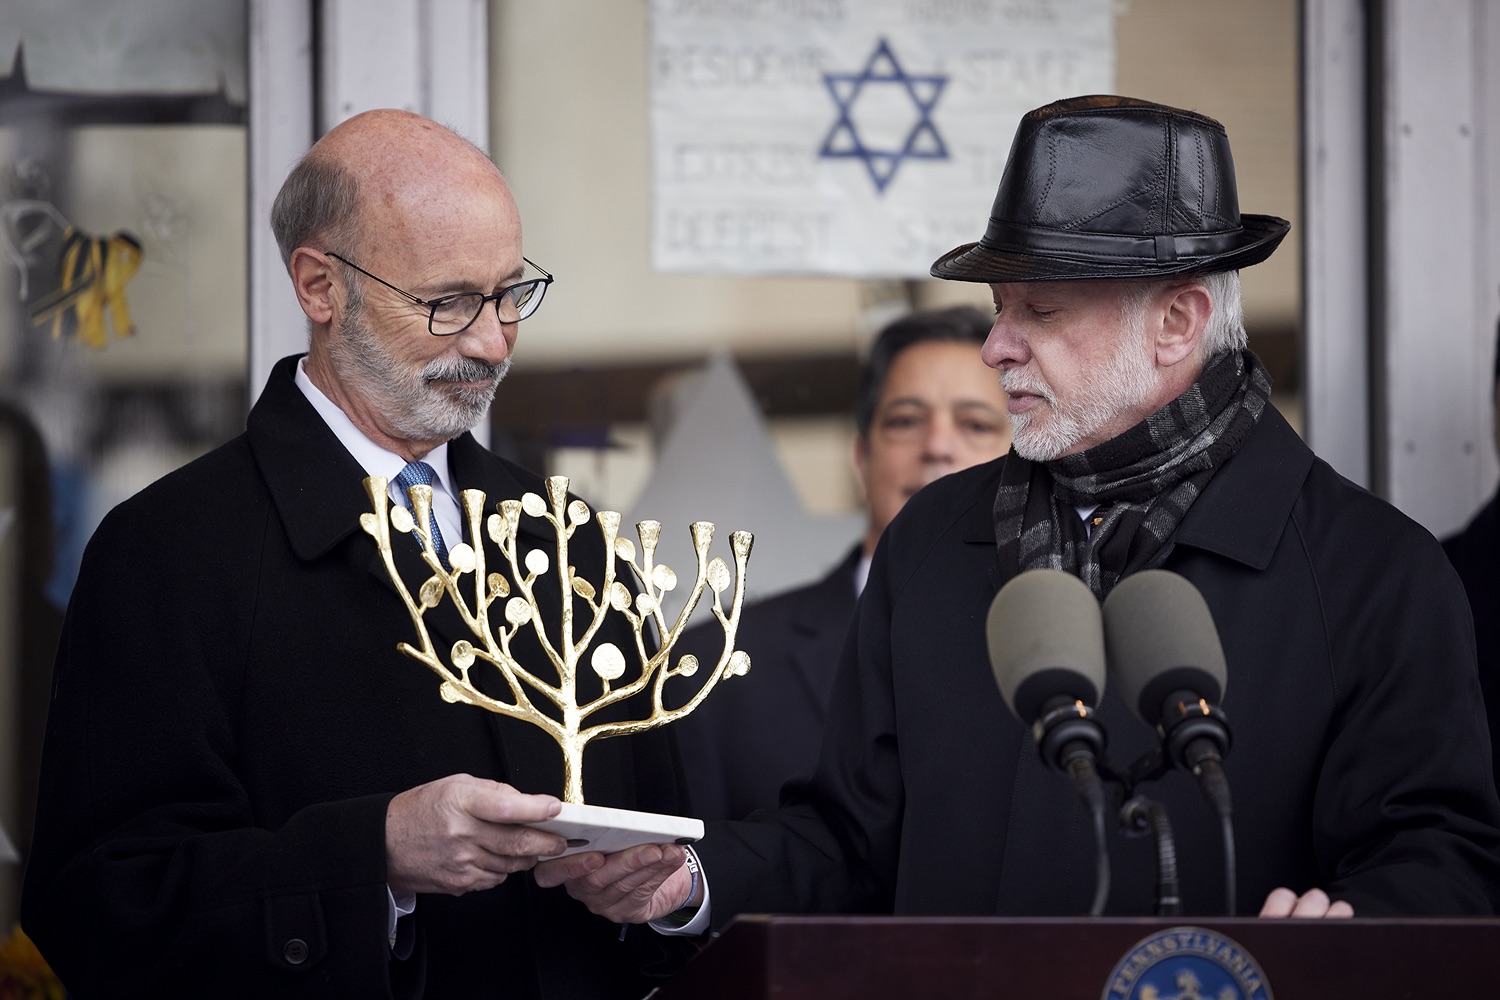 Rabbi Jeffrey Myers presenting a gift to the people of Pennsylvania, a Tree of Life Menorah.  Governor Tom Wolf visited the Tree of Life in Pittsburgh today to announce $6.6 million in state funding to support the rebuilding and reimagining of the synagogue. The governor was joined by Rabbi Jeffrey Myers, Senate Democratic Leader Jay Costa and members of the Tree of Lifes REMEMBER. REBUILD. RENEW campaign which will transform the site of the worst antisemitic attack in U.S. history into a new place of hope, remembrance, and education. Pittsburgh, PA - December 6, 2021<br><a href="https://filesource.amperwave.net/commonwealthofpa/photo/20308_gov_treeOfLife_dz_011_copy.jpg" target="_blank">⇣ Download Photo</a>